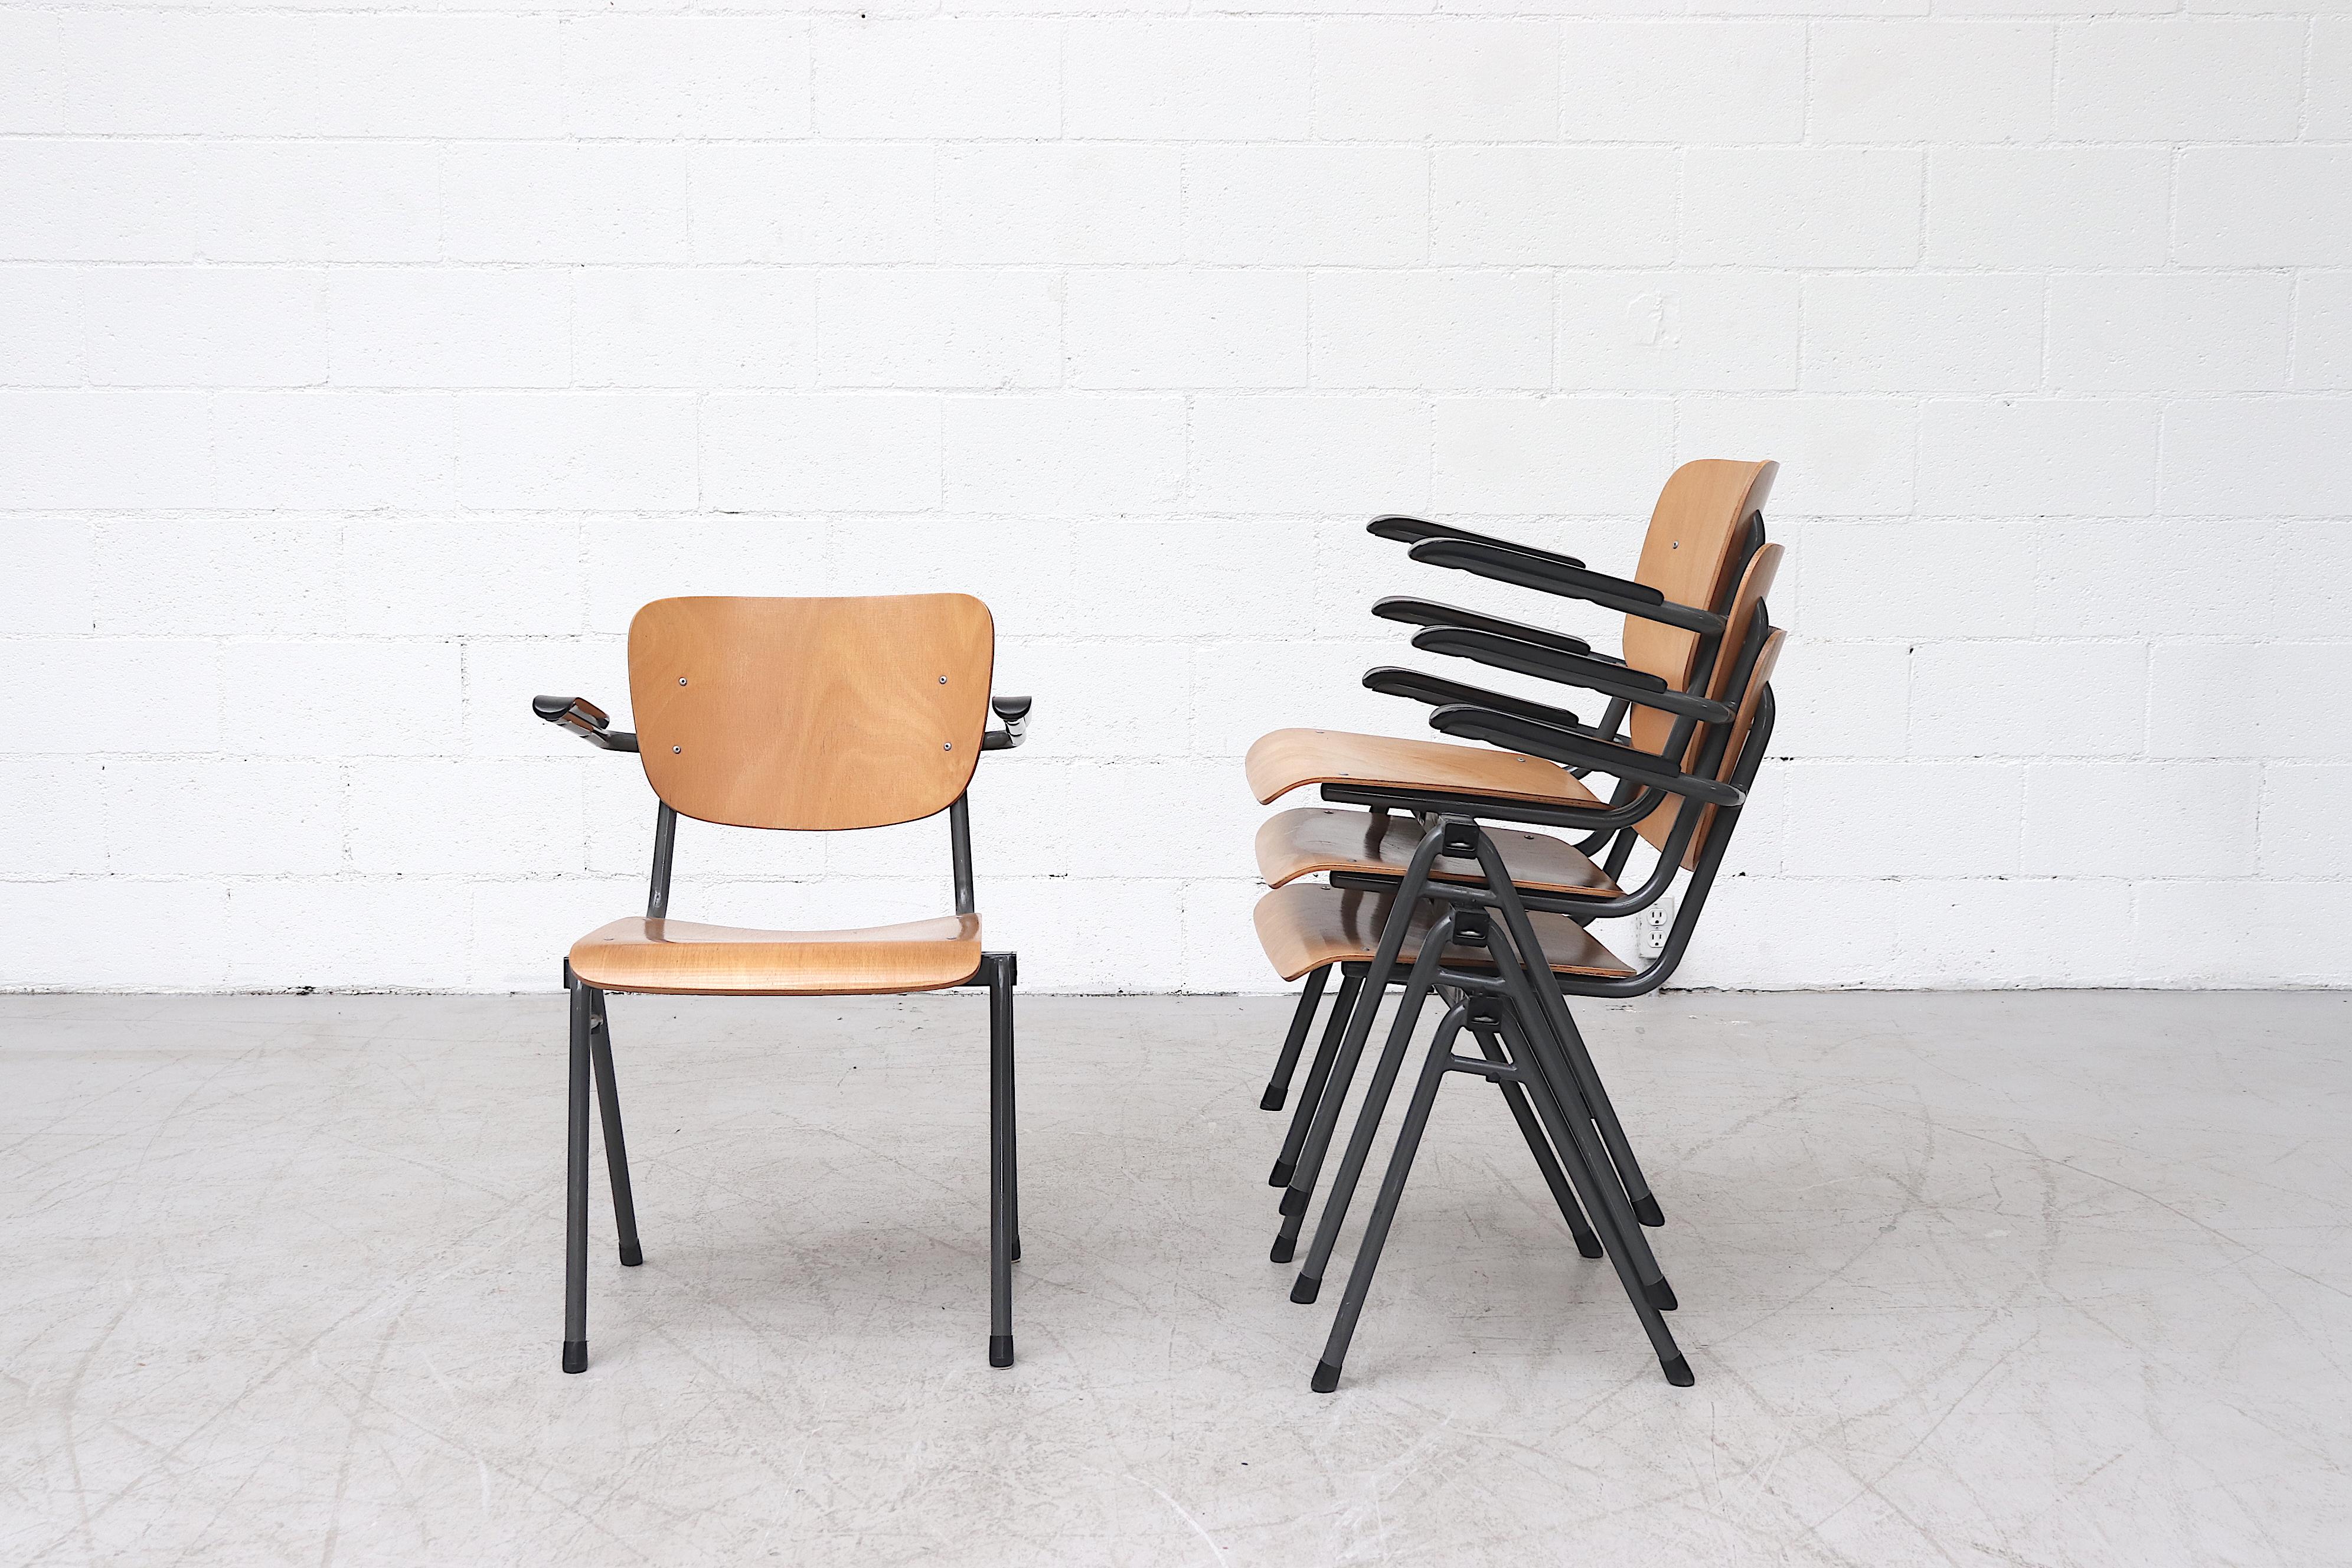 Two sets of Industrial stacking school chairs with bakelite arm rests, grey enameled metal frames and blonde plywood seats. In original condition with some wear consistent with age and use. Set price.